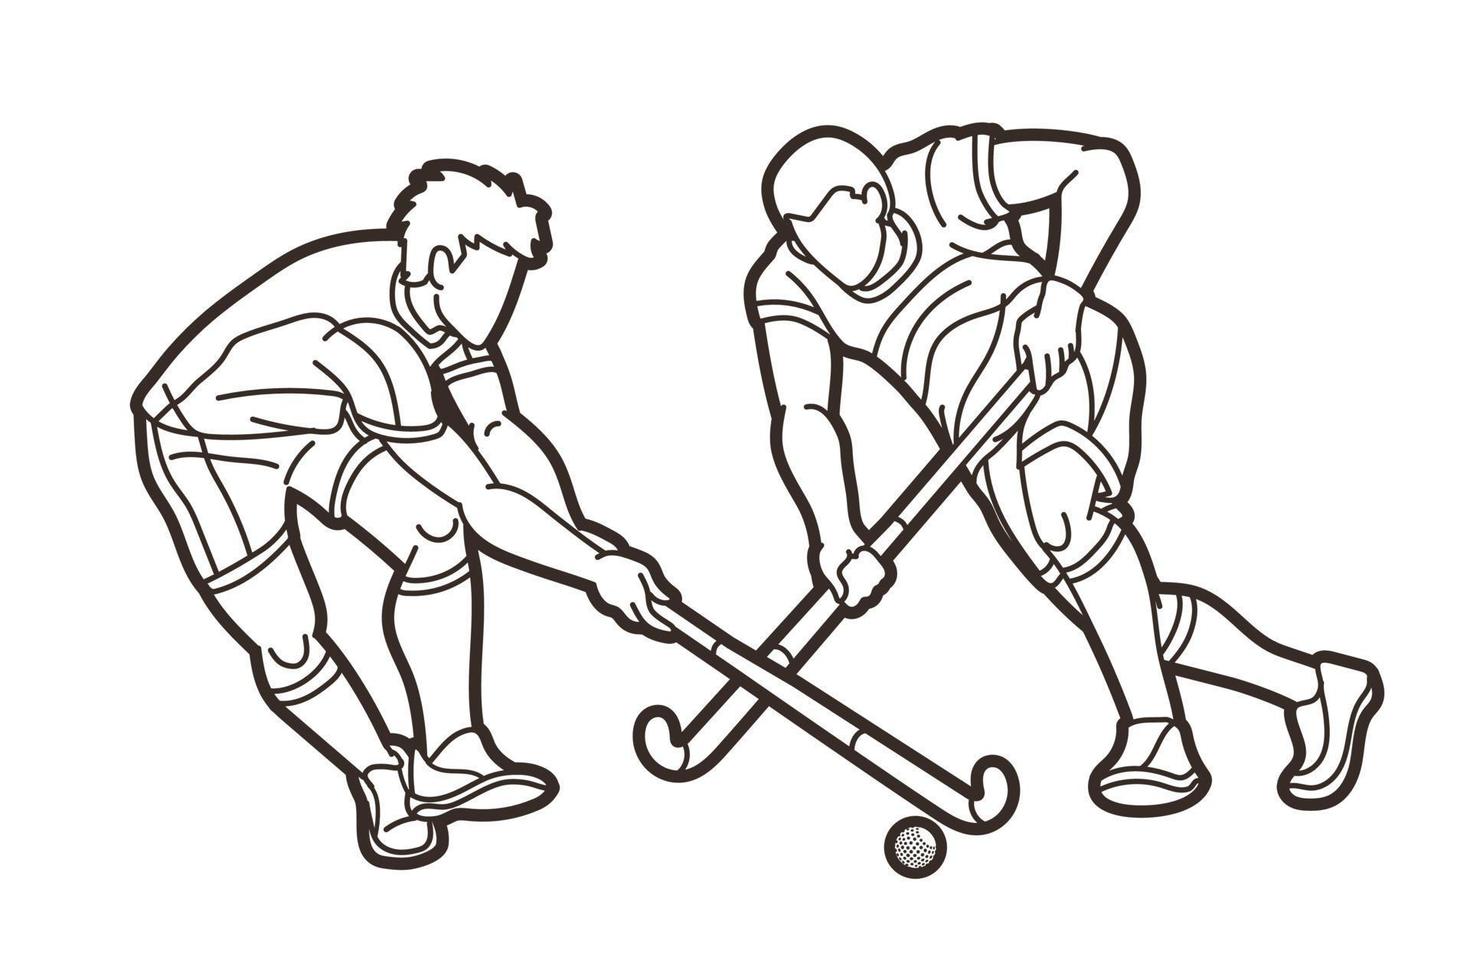 Outline Field Hockey Sport Male Players vector